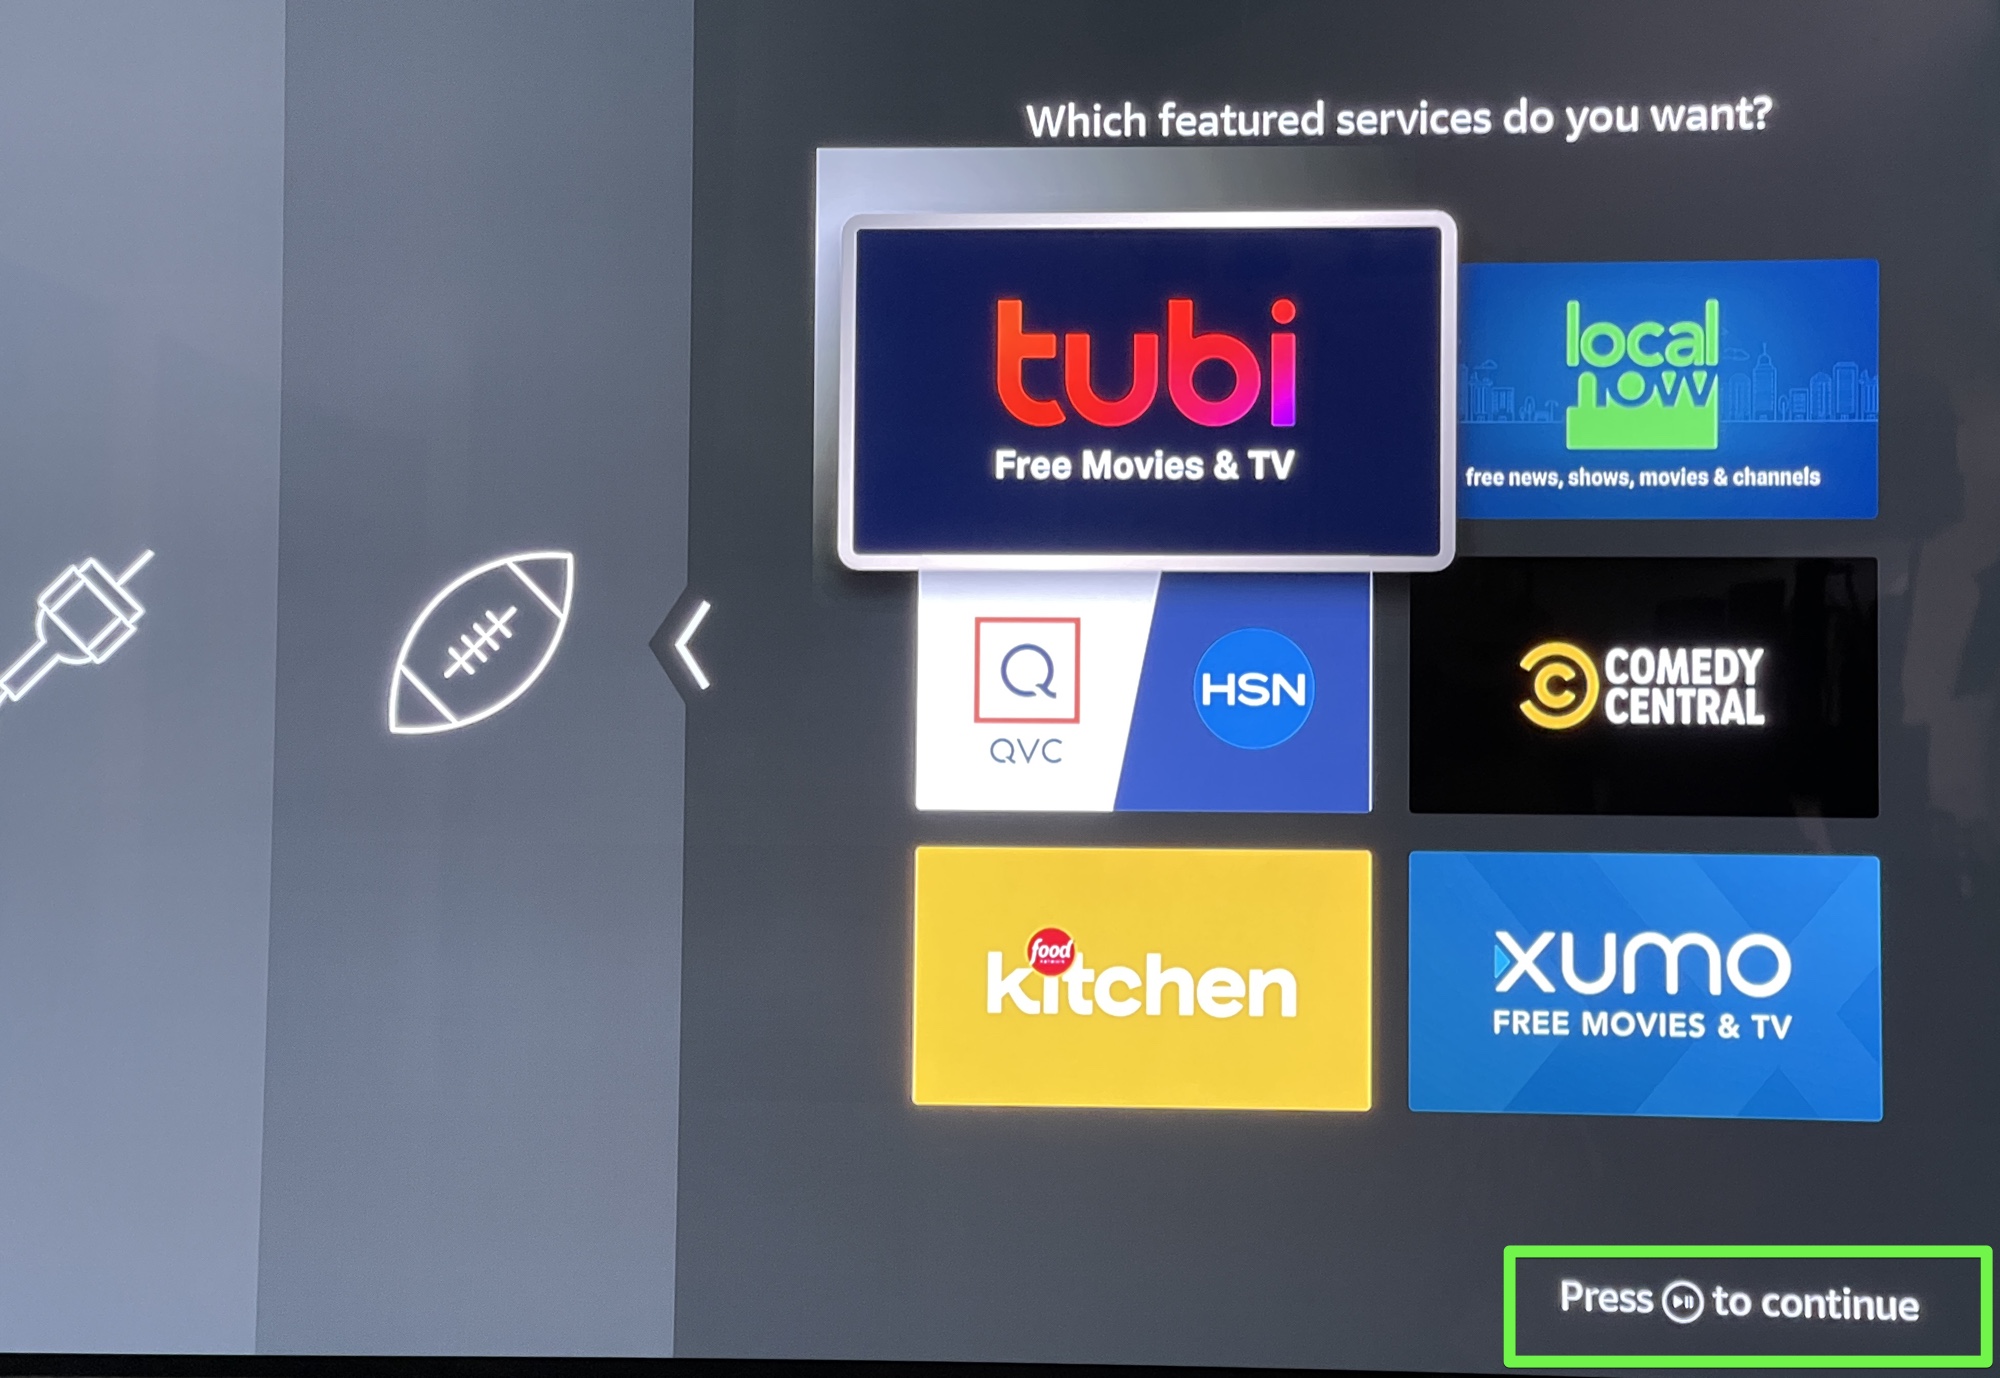 fire tv setup Featured apps suggestion screen